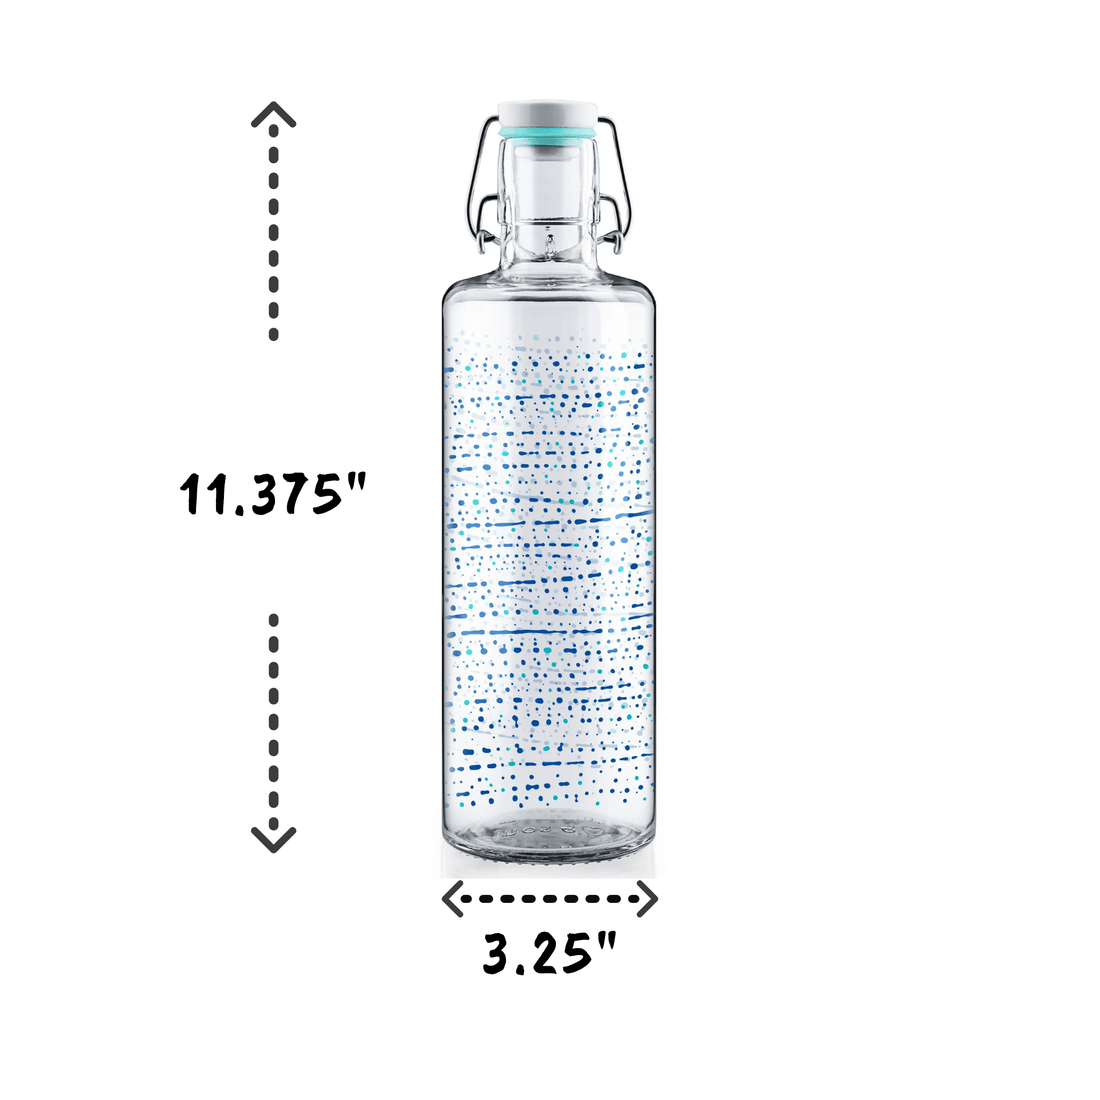 Soulbottles One Million Drops 1.0 Liter Water Bottle With Blue And Green Drops Of Color In Design. Showing dimensions 3.25" width by 11.375" height.